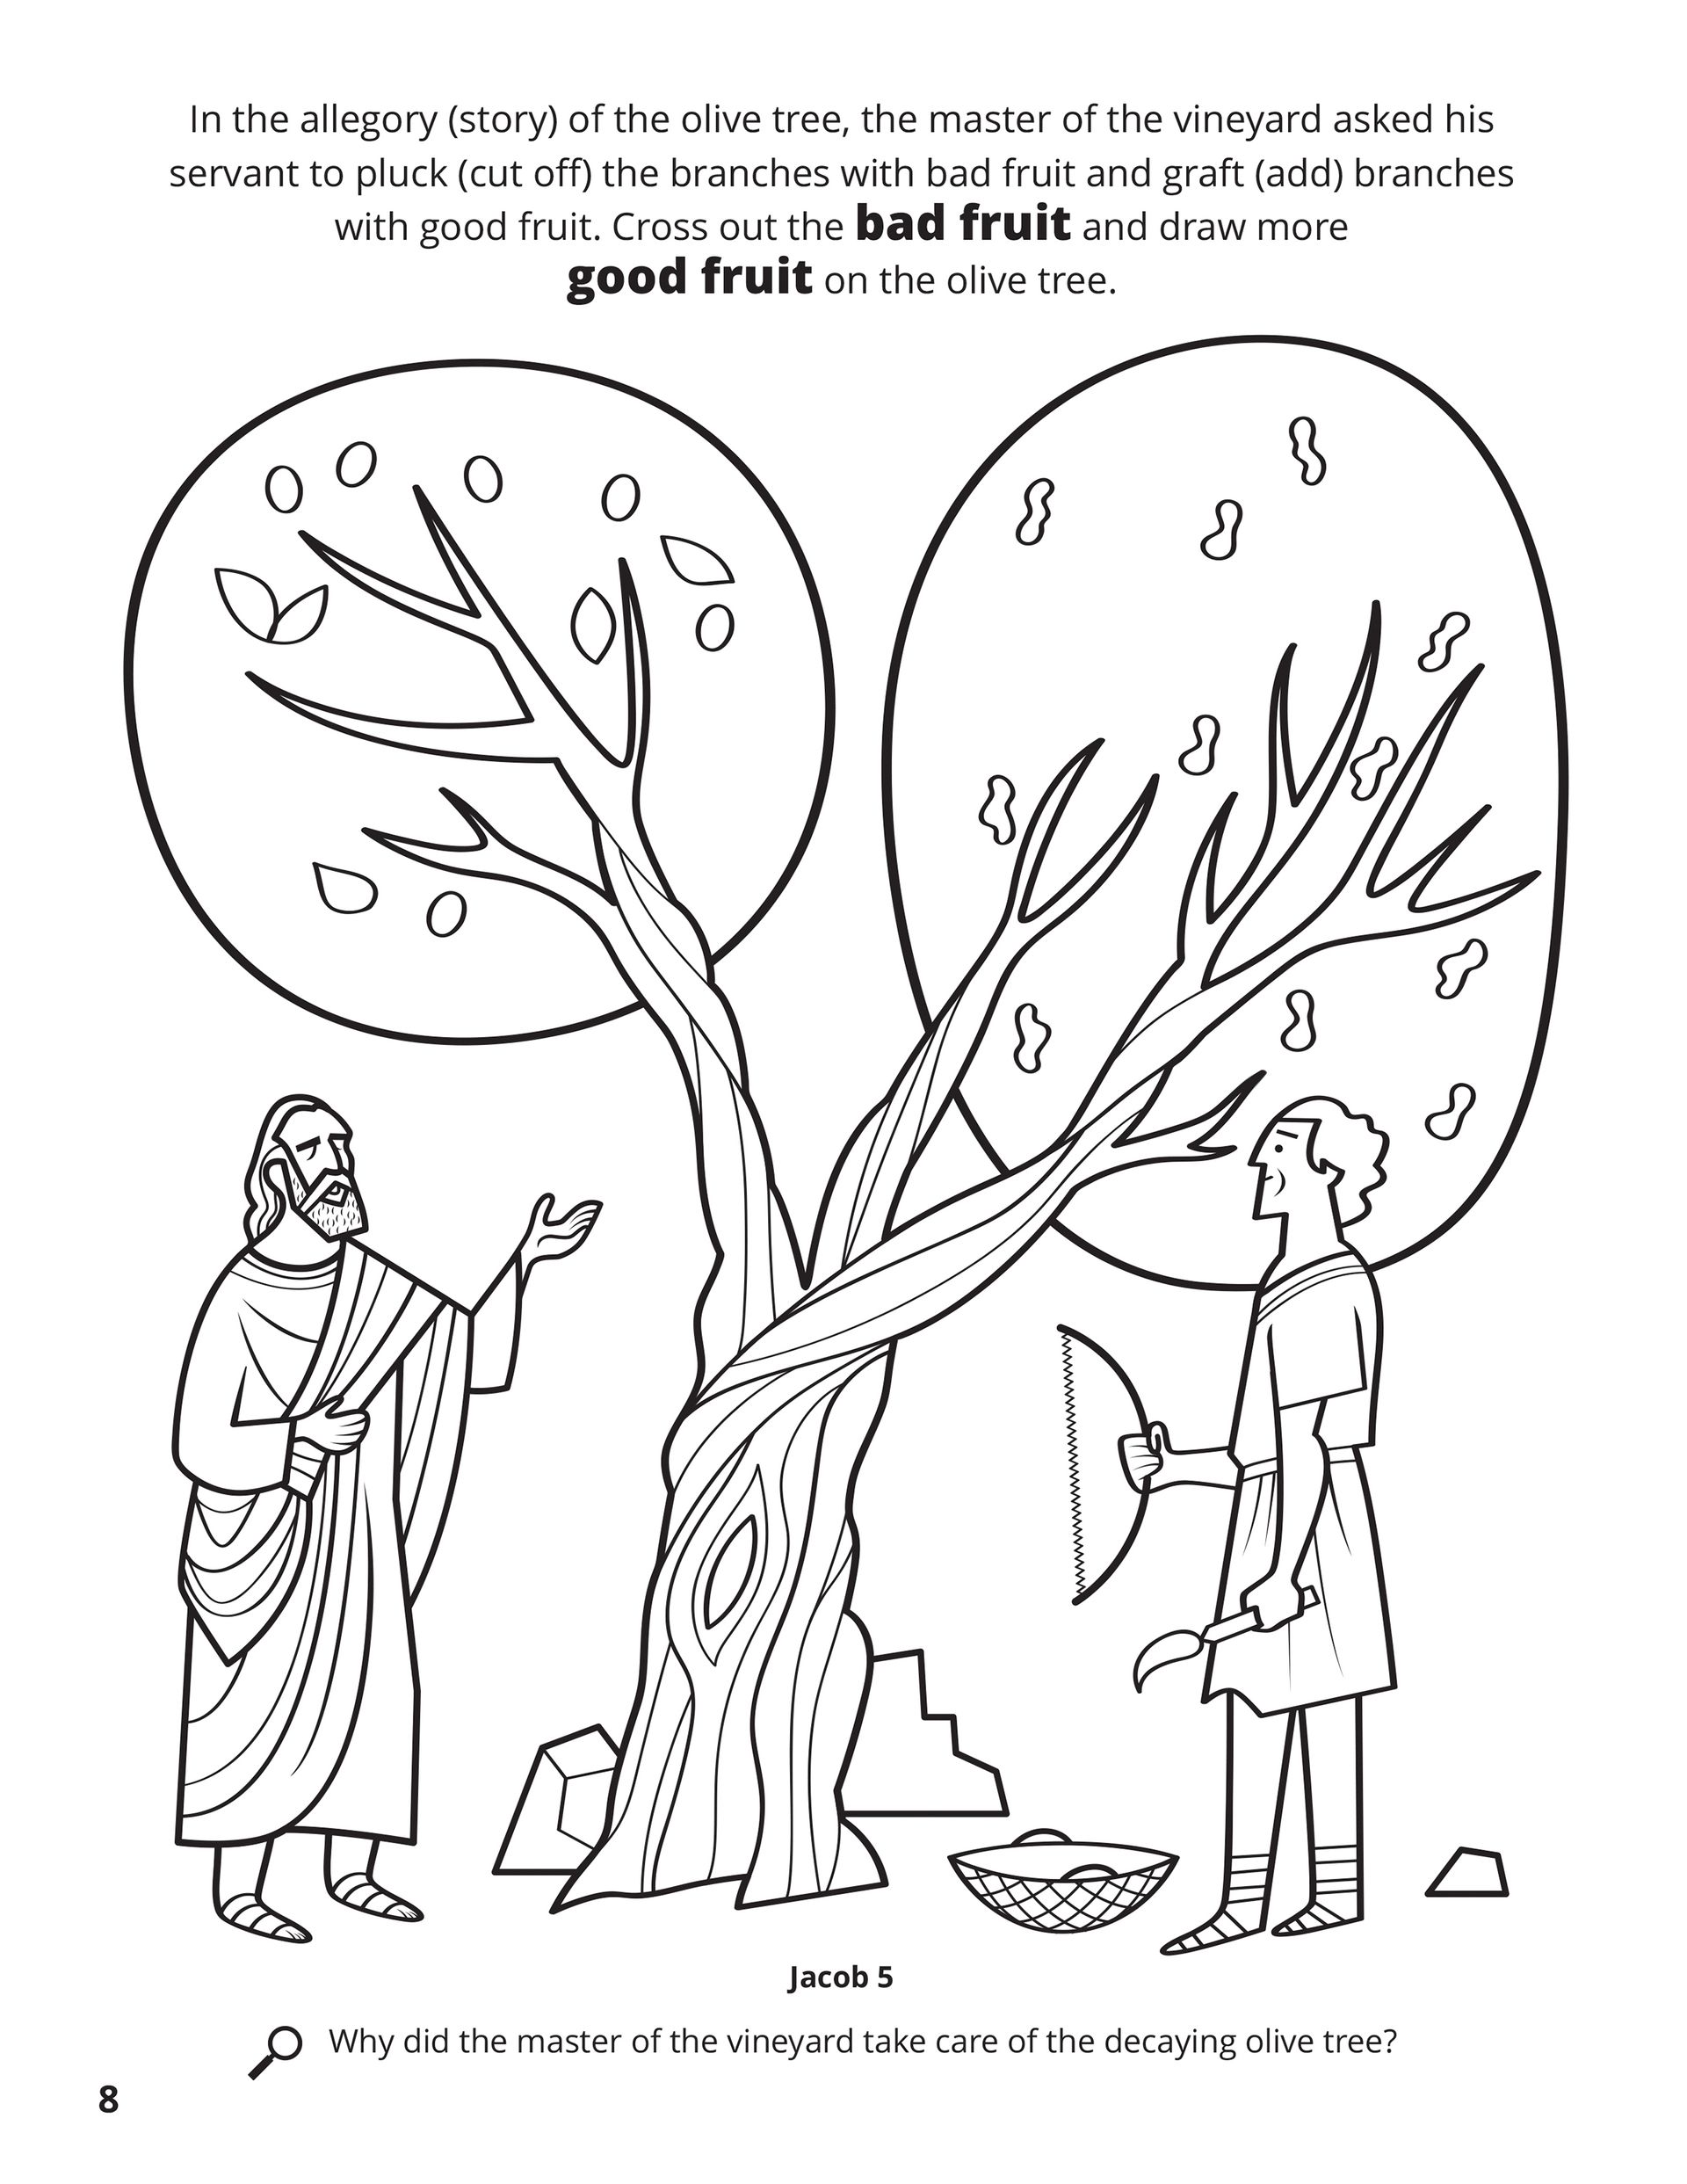 In the allegory (story) of the olive tree, the master of the vineyard asked his servant to pluck (cut off) the branches with bad fruit and graft (add) branches with good fruit. Cross out the bad fruit and draw more good fruit on the olive tree. Location in the Scriptures: Jacob 5. Search the Scriptures: Why did the master of the vineyard take care of the decaying olive tree?